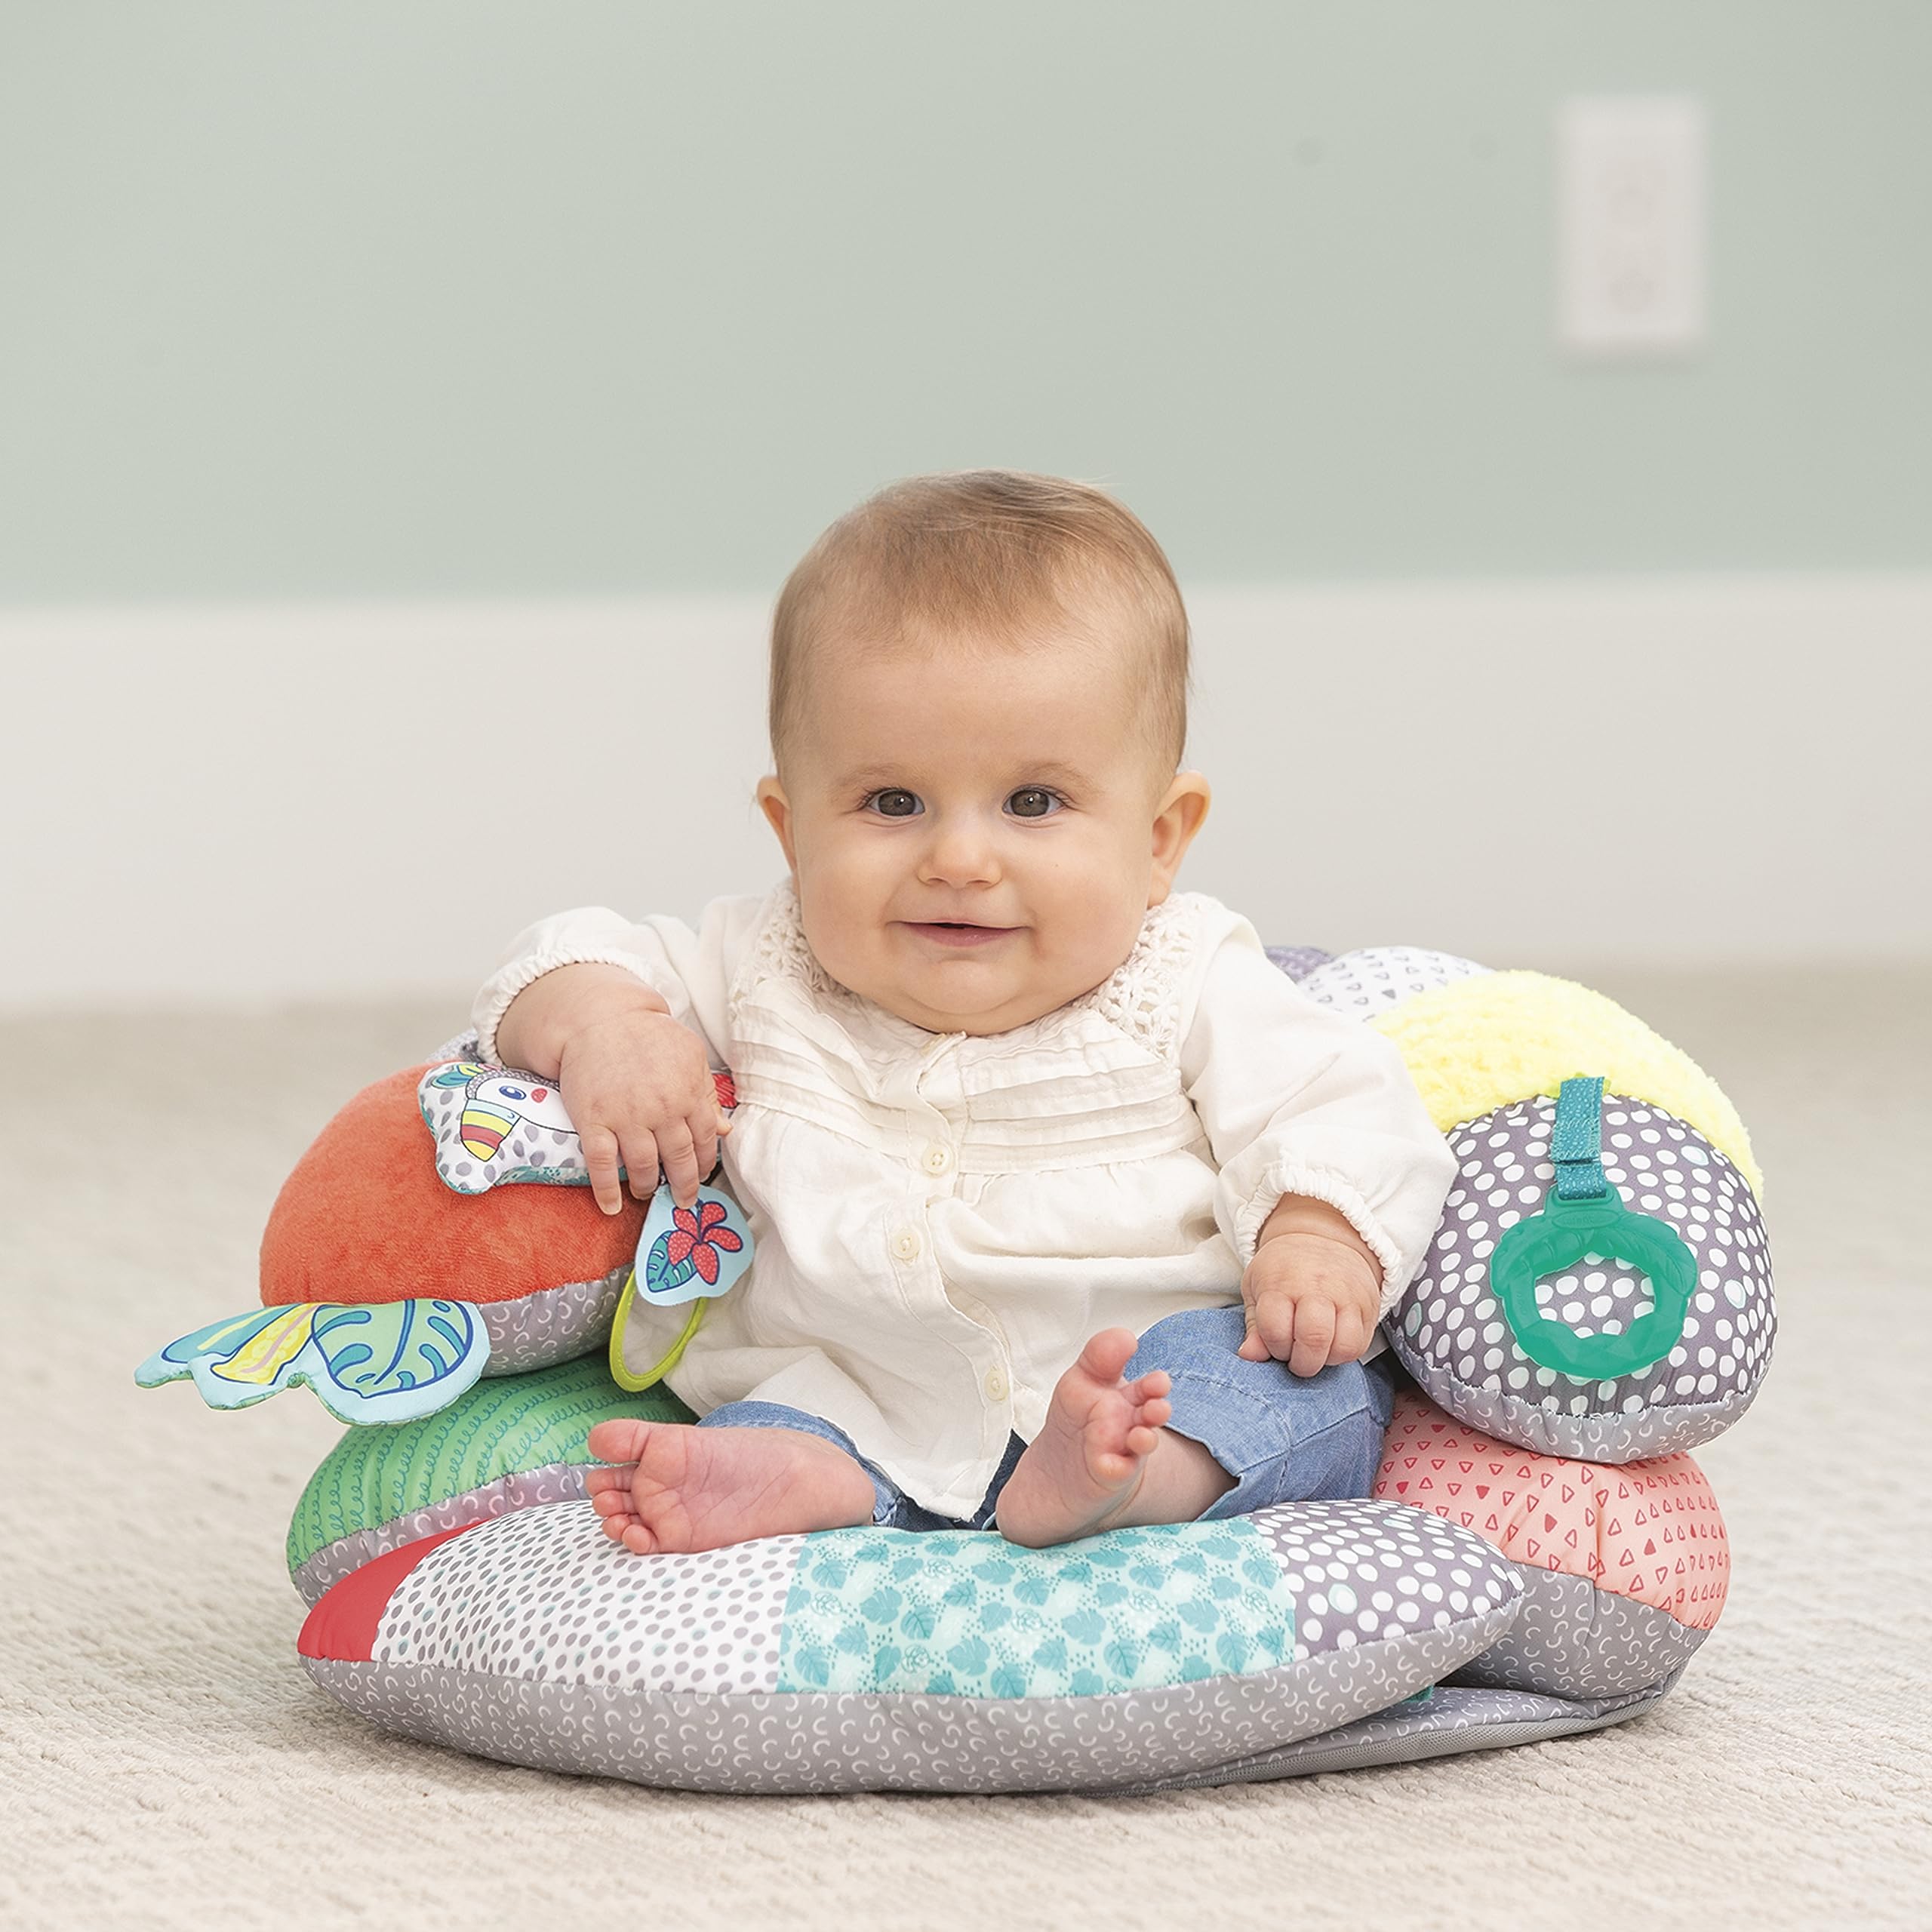 Infantino 2-in-1 Tummy Time & Seated Support - for Newborns and Older Babies, with Detachable Support Pillow and Toys, for Development of Strong Head and Neck Muscles